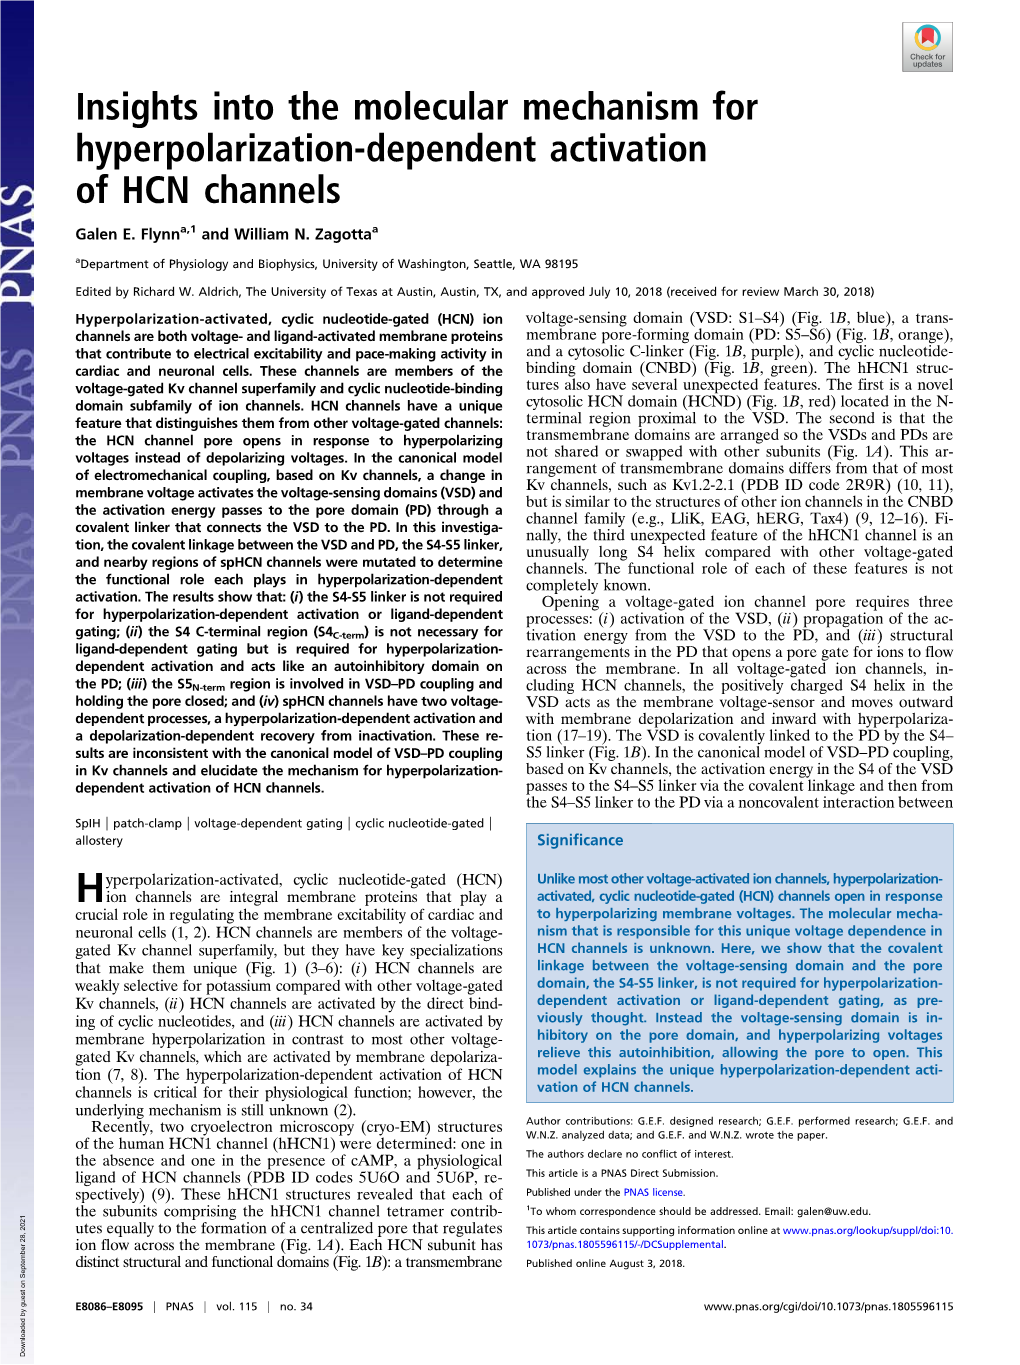 Insights Into the Molecular Mechanism for Hyperpolarization-Dependent Activation of HCN Channels